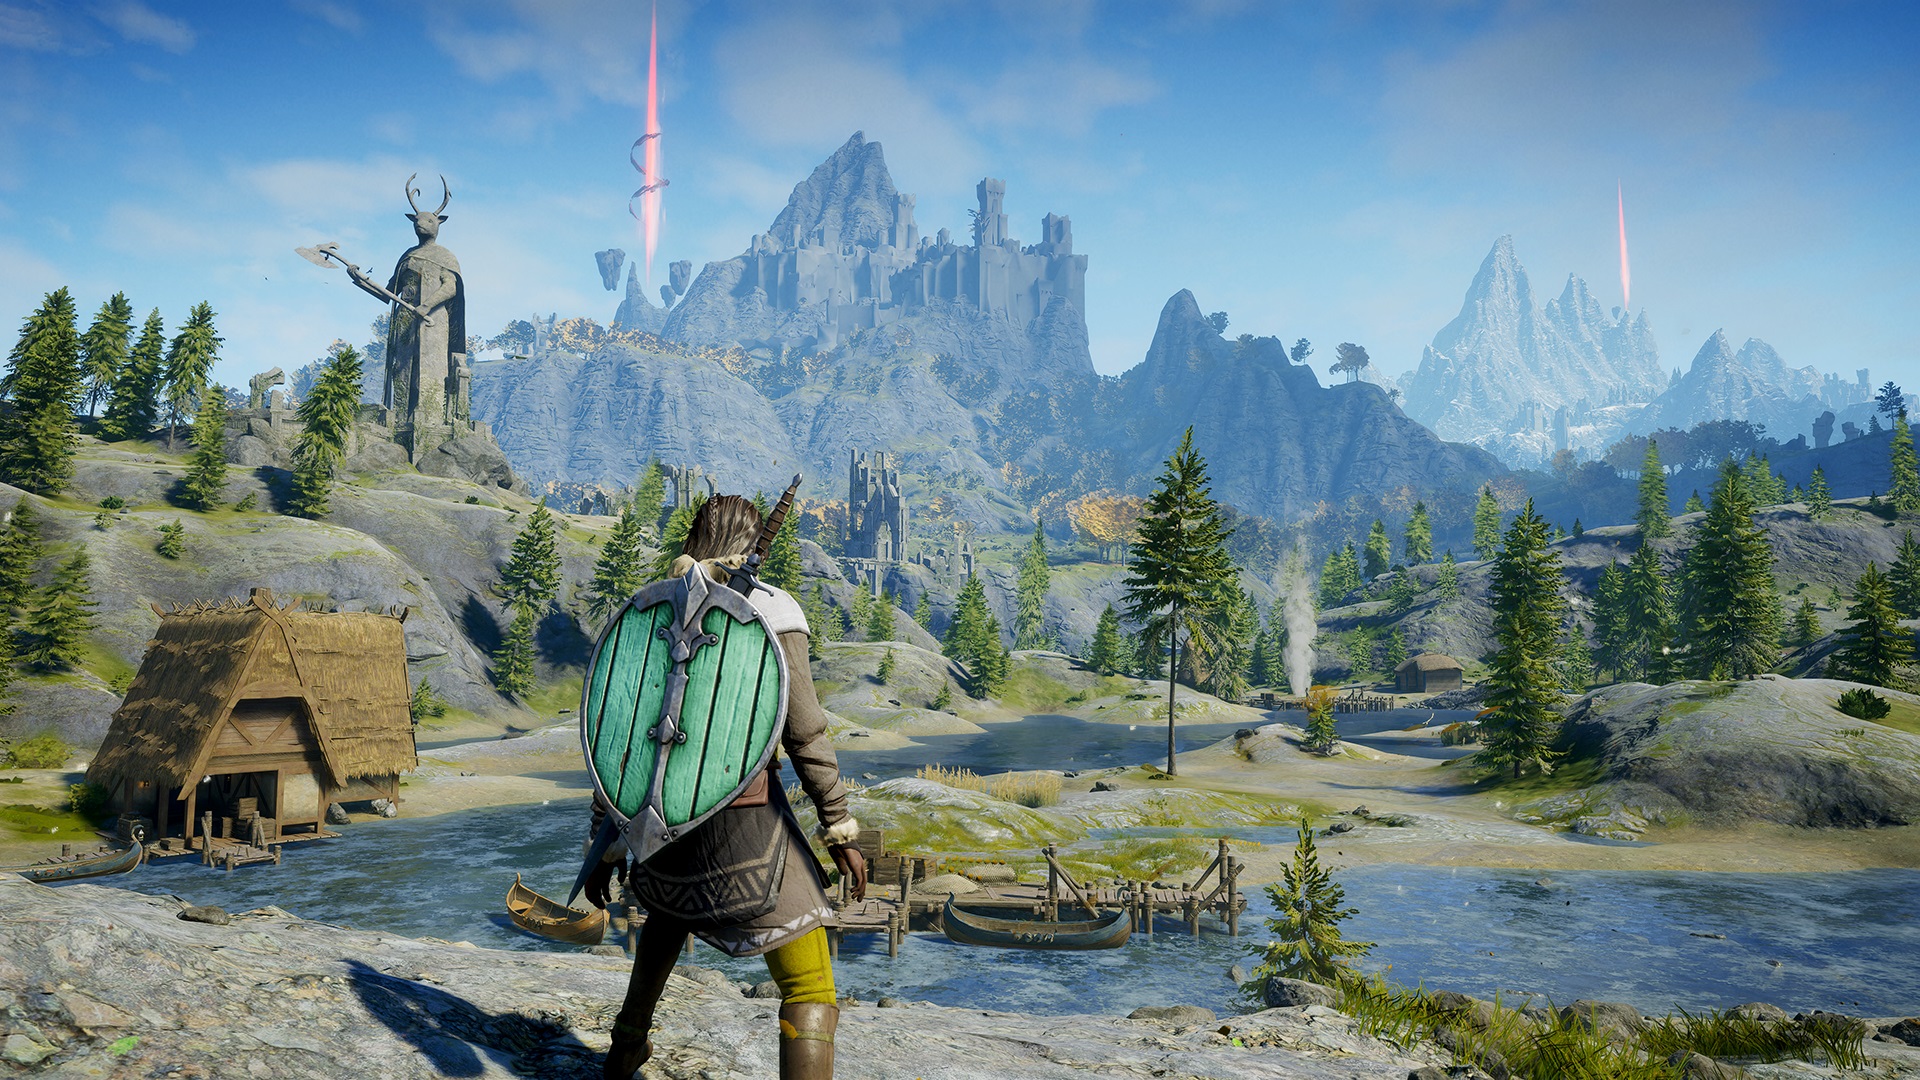 Ravenbound - A player wearing a sword and greenshield on their back looks out over a medieval Scandinavian-inspired landscape of trees and rivers with a boat dock and stone statue nearby.